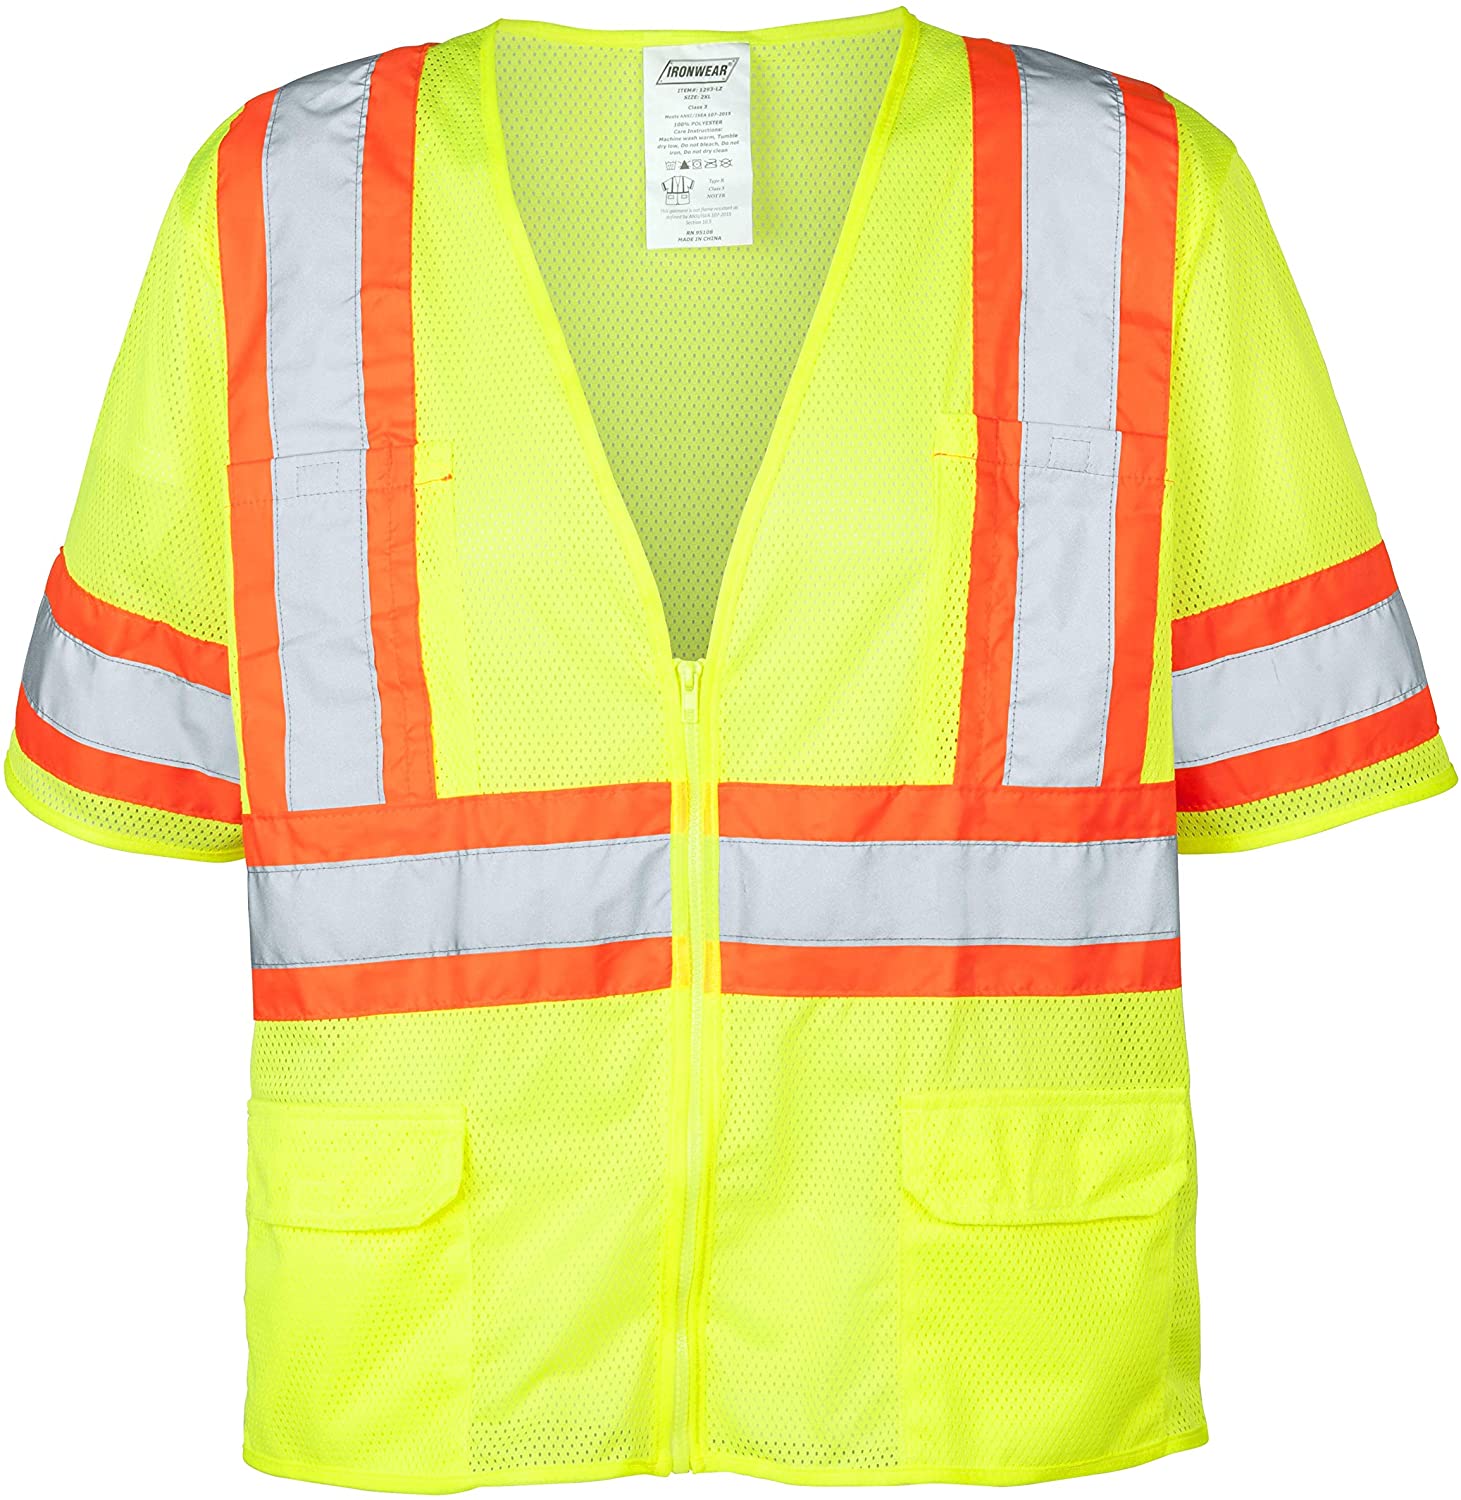 Ironwear® 1293-LZ Class 3 Hi-Vis Lime Reflective Safety Vest with 6 Pockets, X-Large